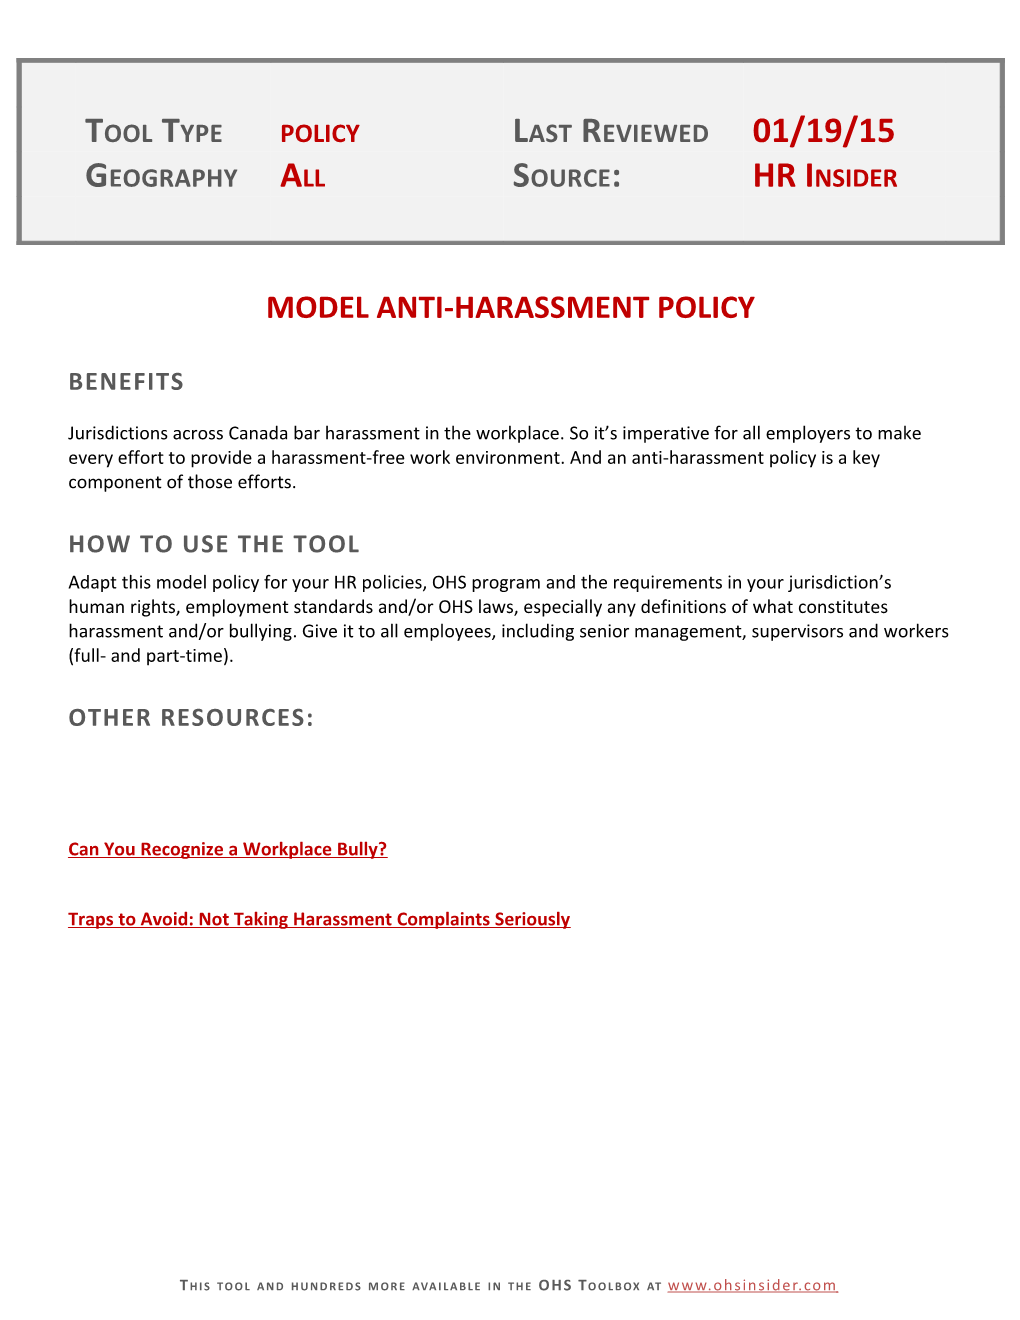 Model Anti-Harassment Policy